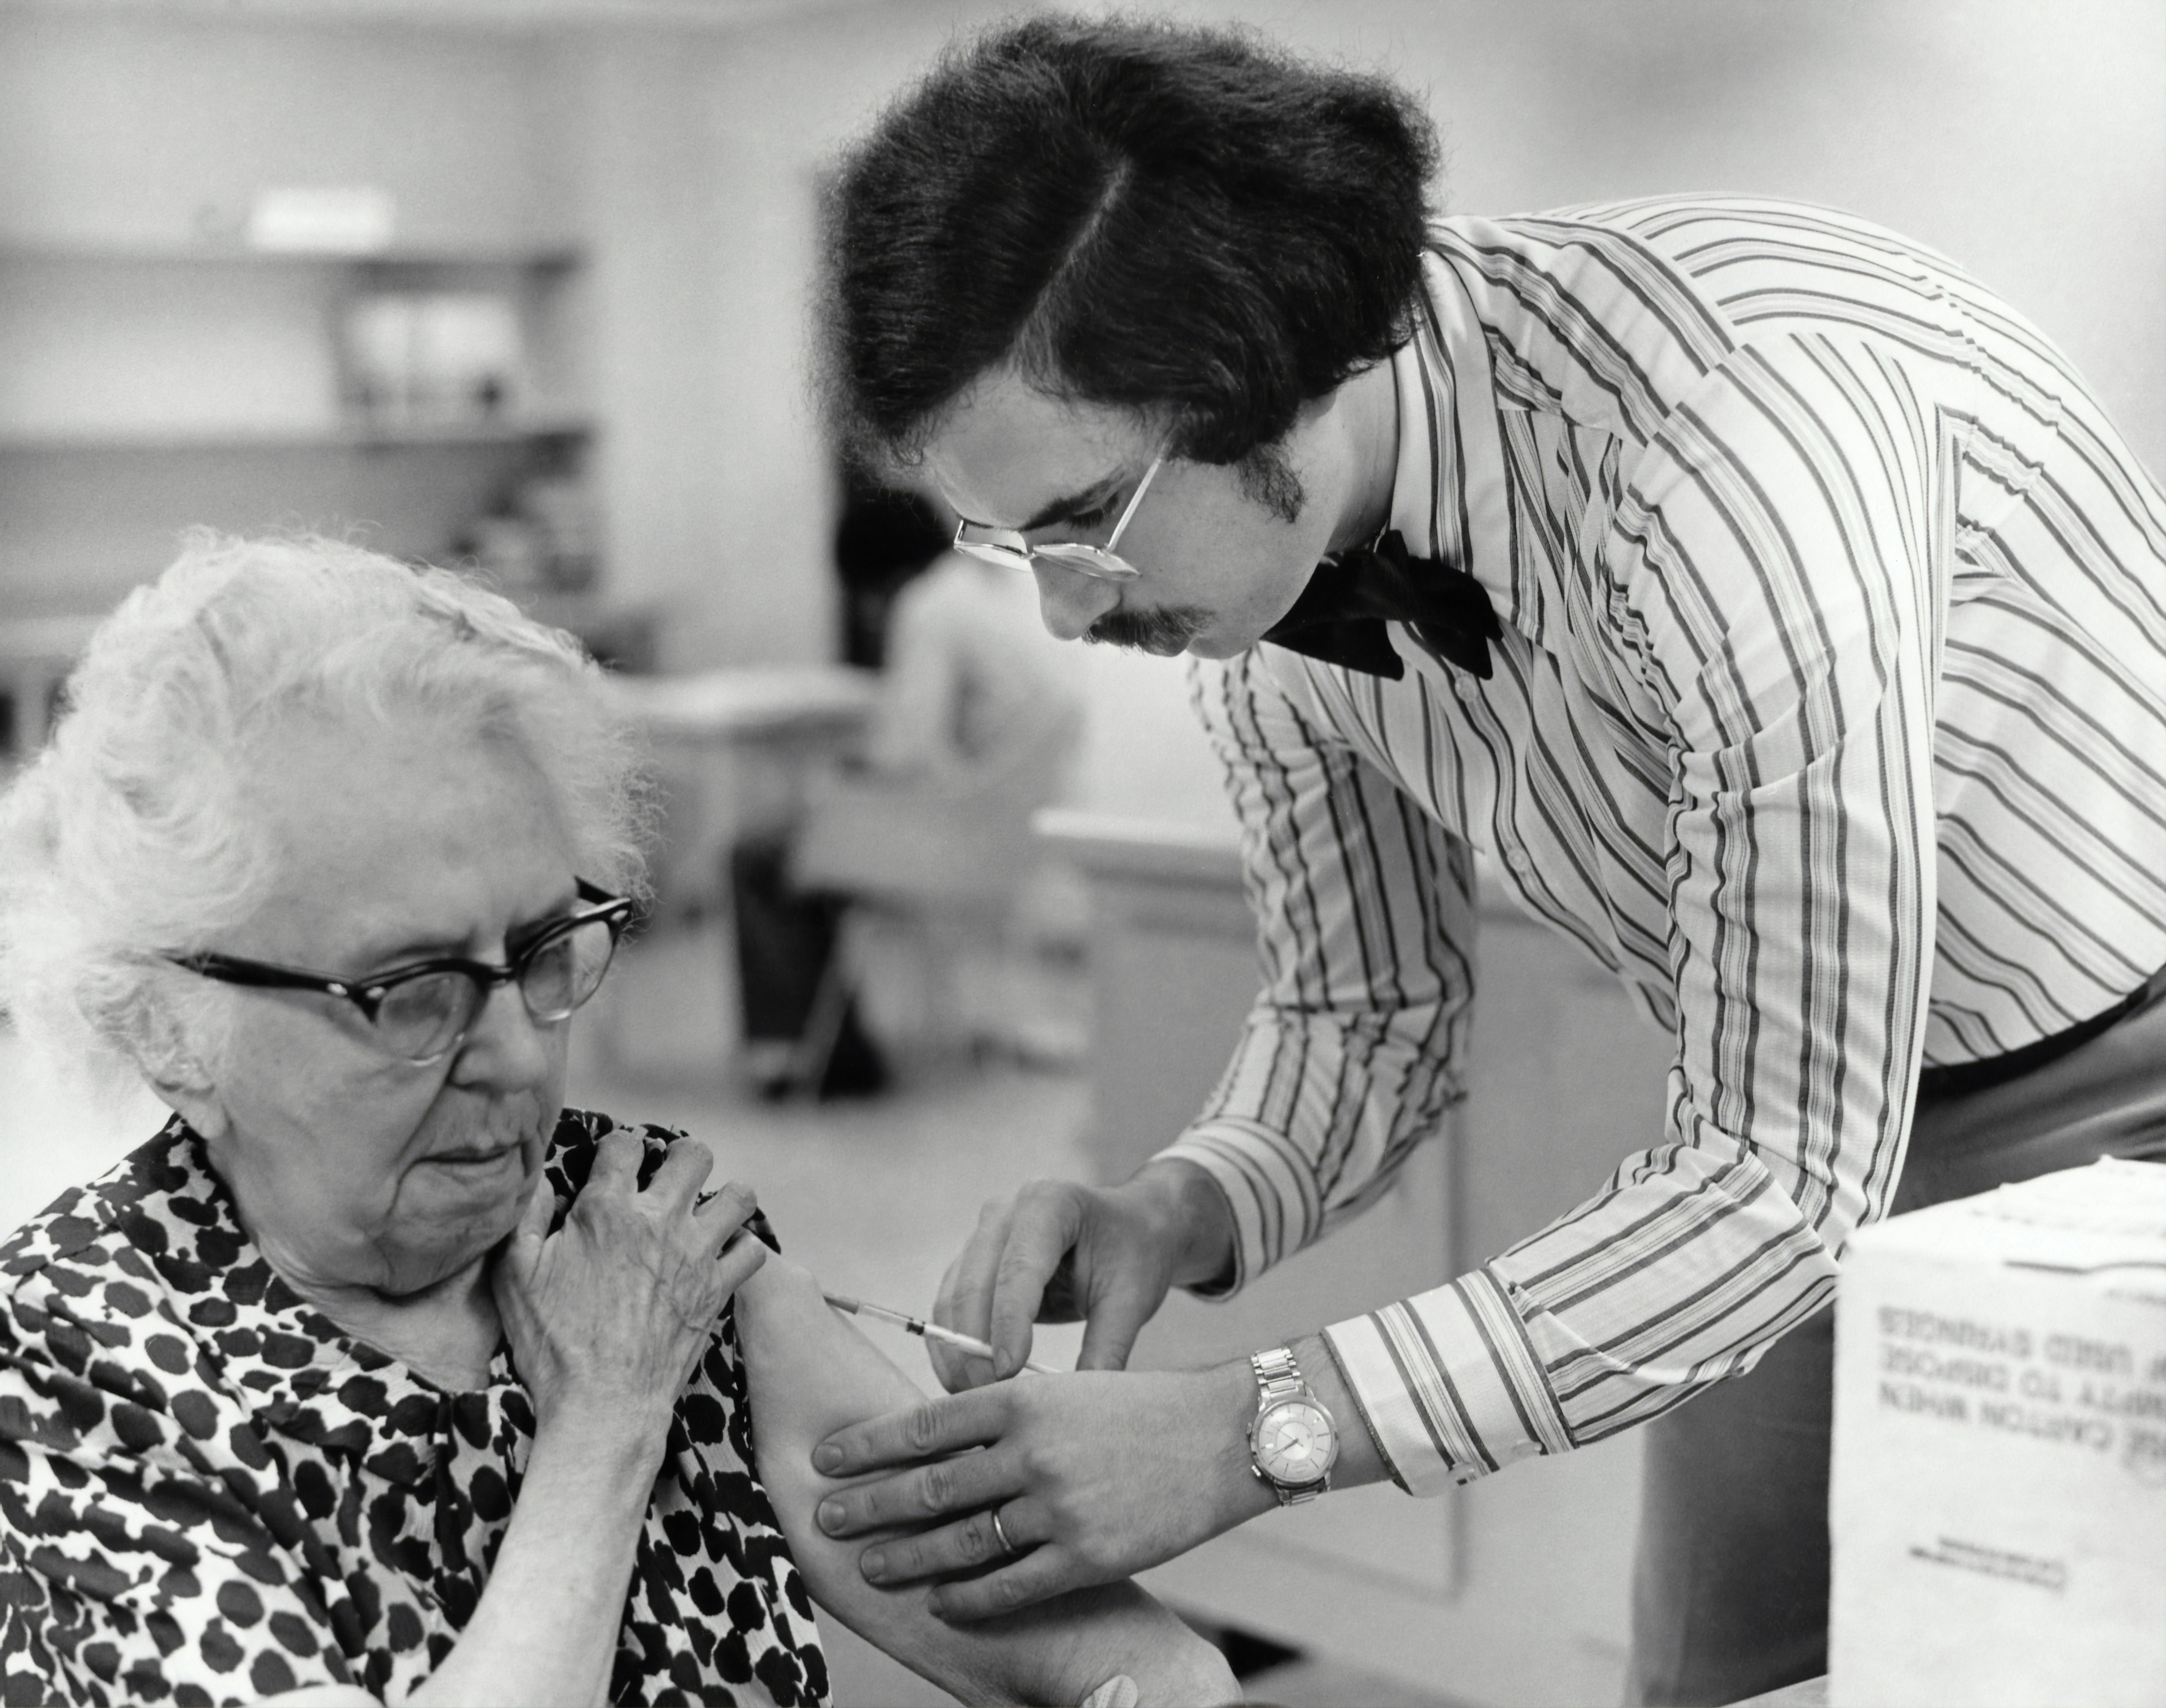 Created in 1976, this historic photograph depicted an elderly female as she was receiving a vaccination by a public health clinician during the nationwide Swine Flu vaccination campaign, which began October 1, 1976.

